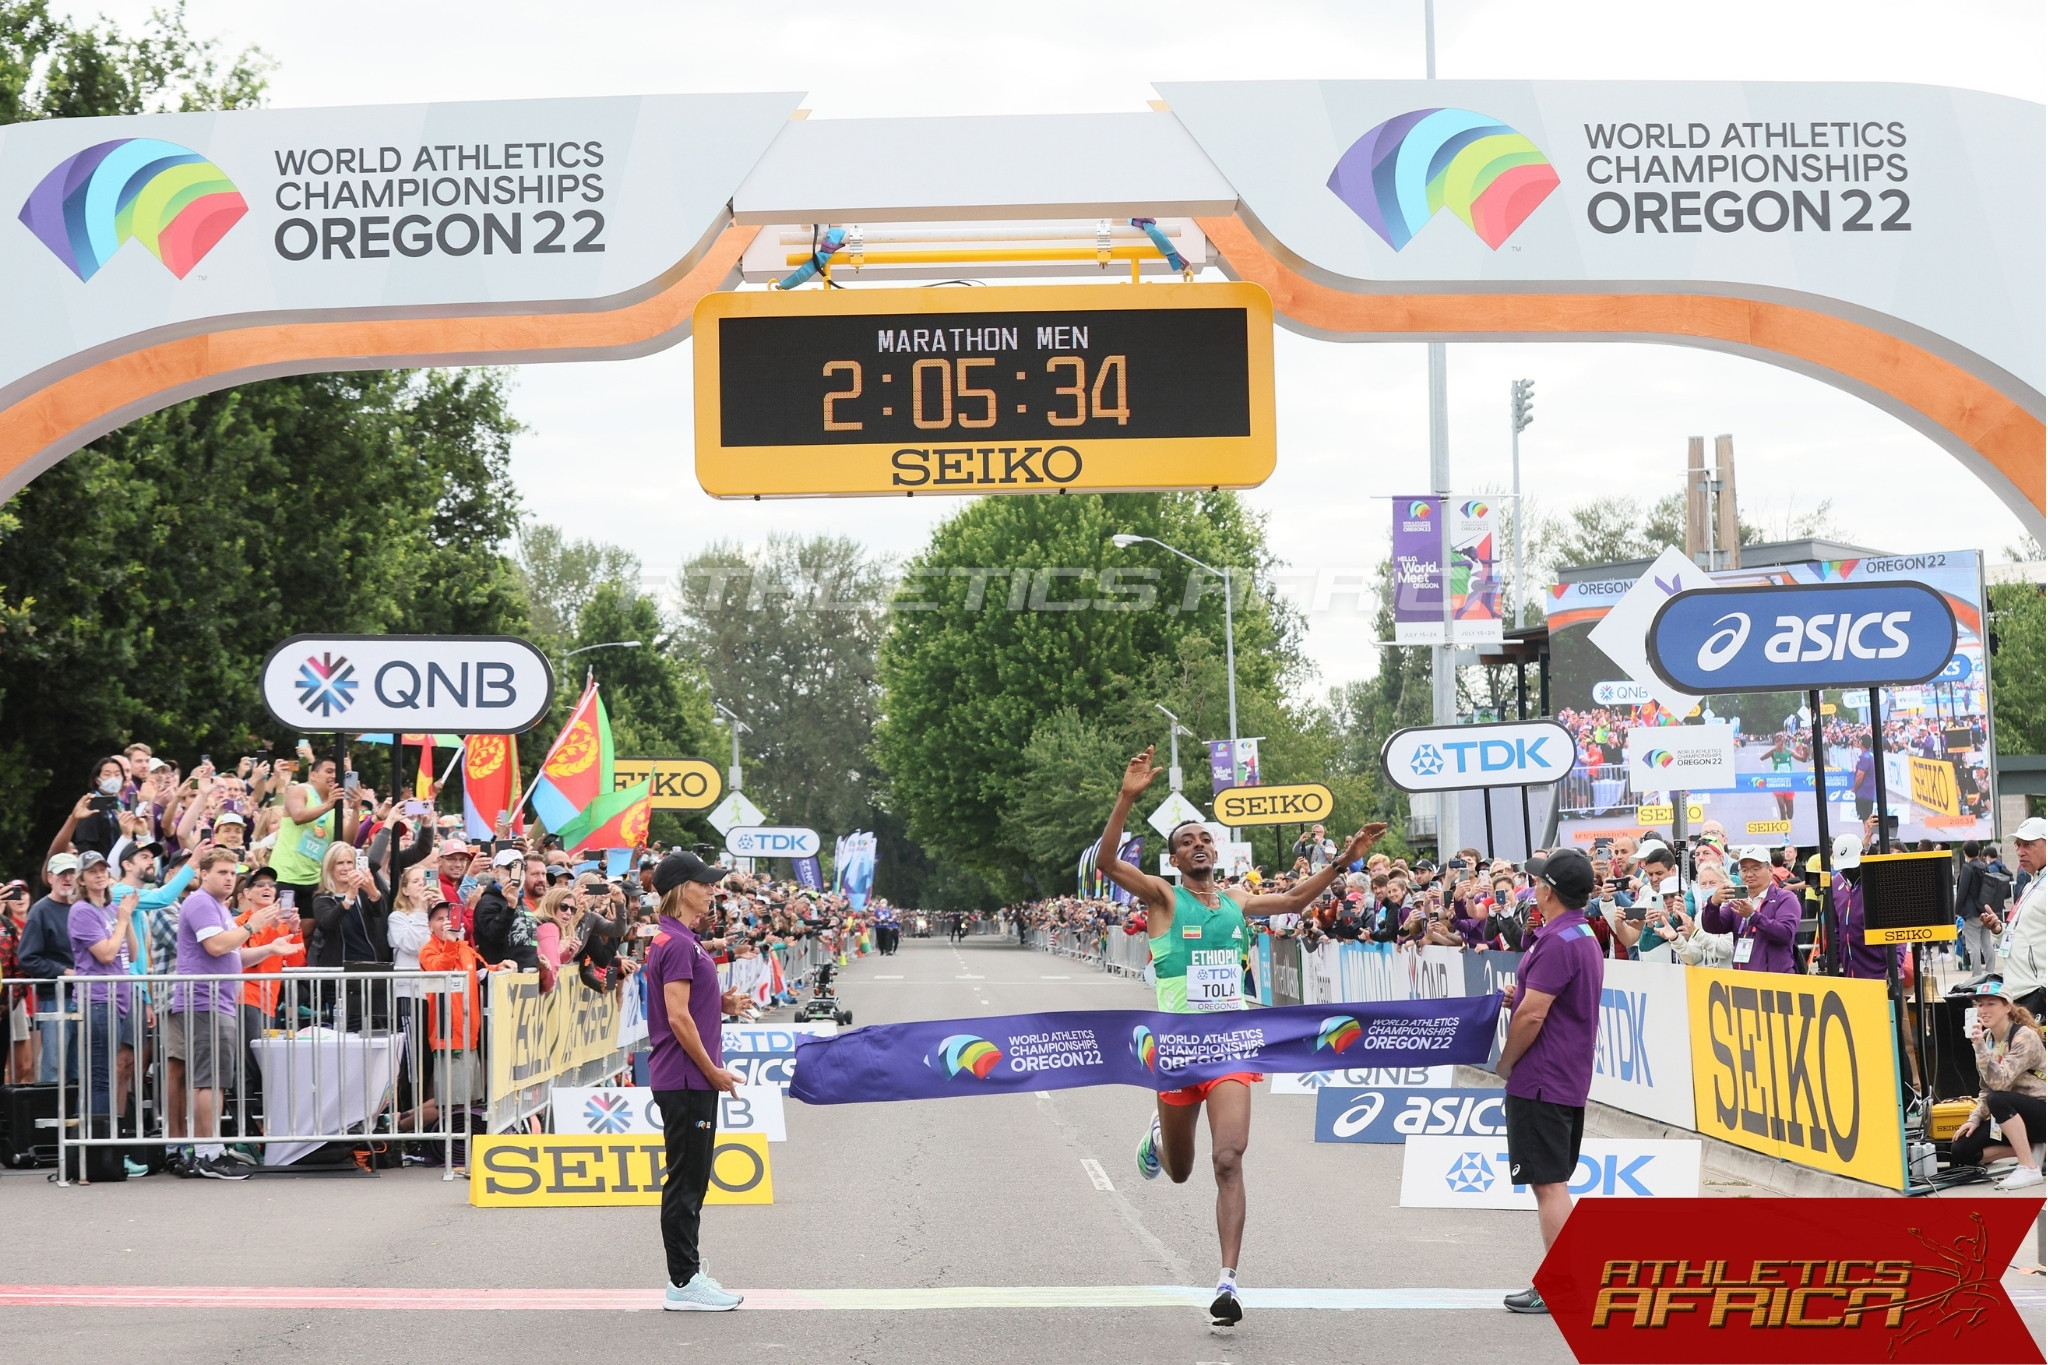 Tamirat Tola owns the field as he crosses the line in 2:05:36, taking gold and smashing the 13 year-old world championship marathon record / Photo credit: Getty Images for World Athletics